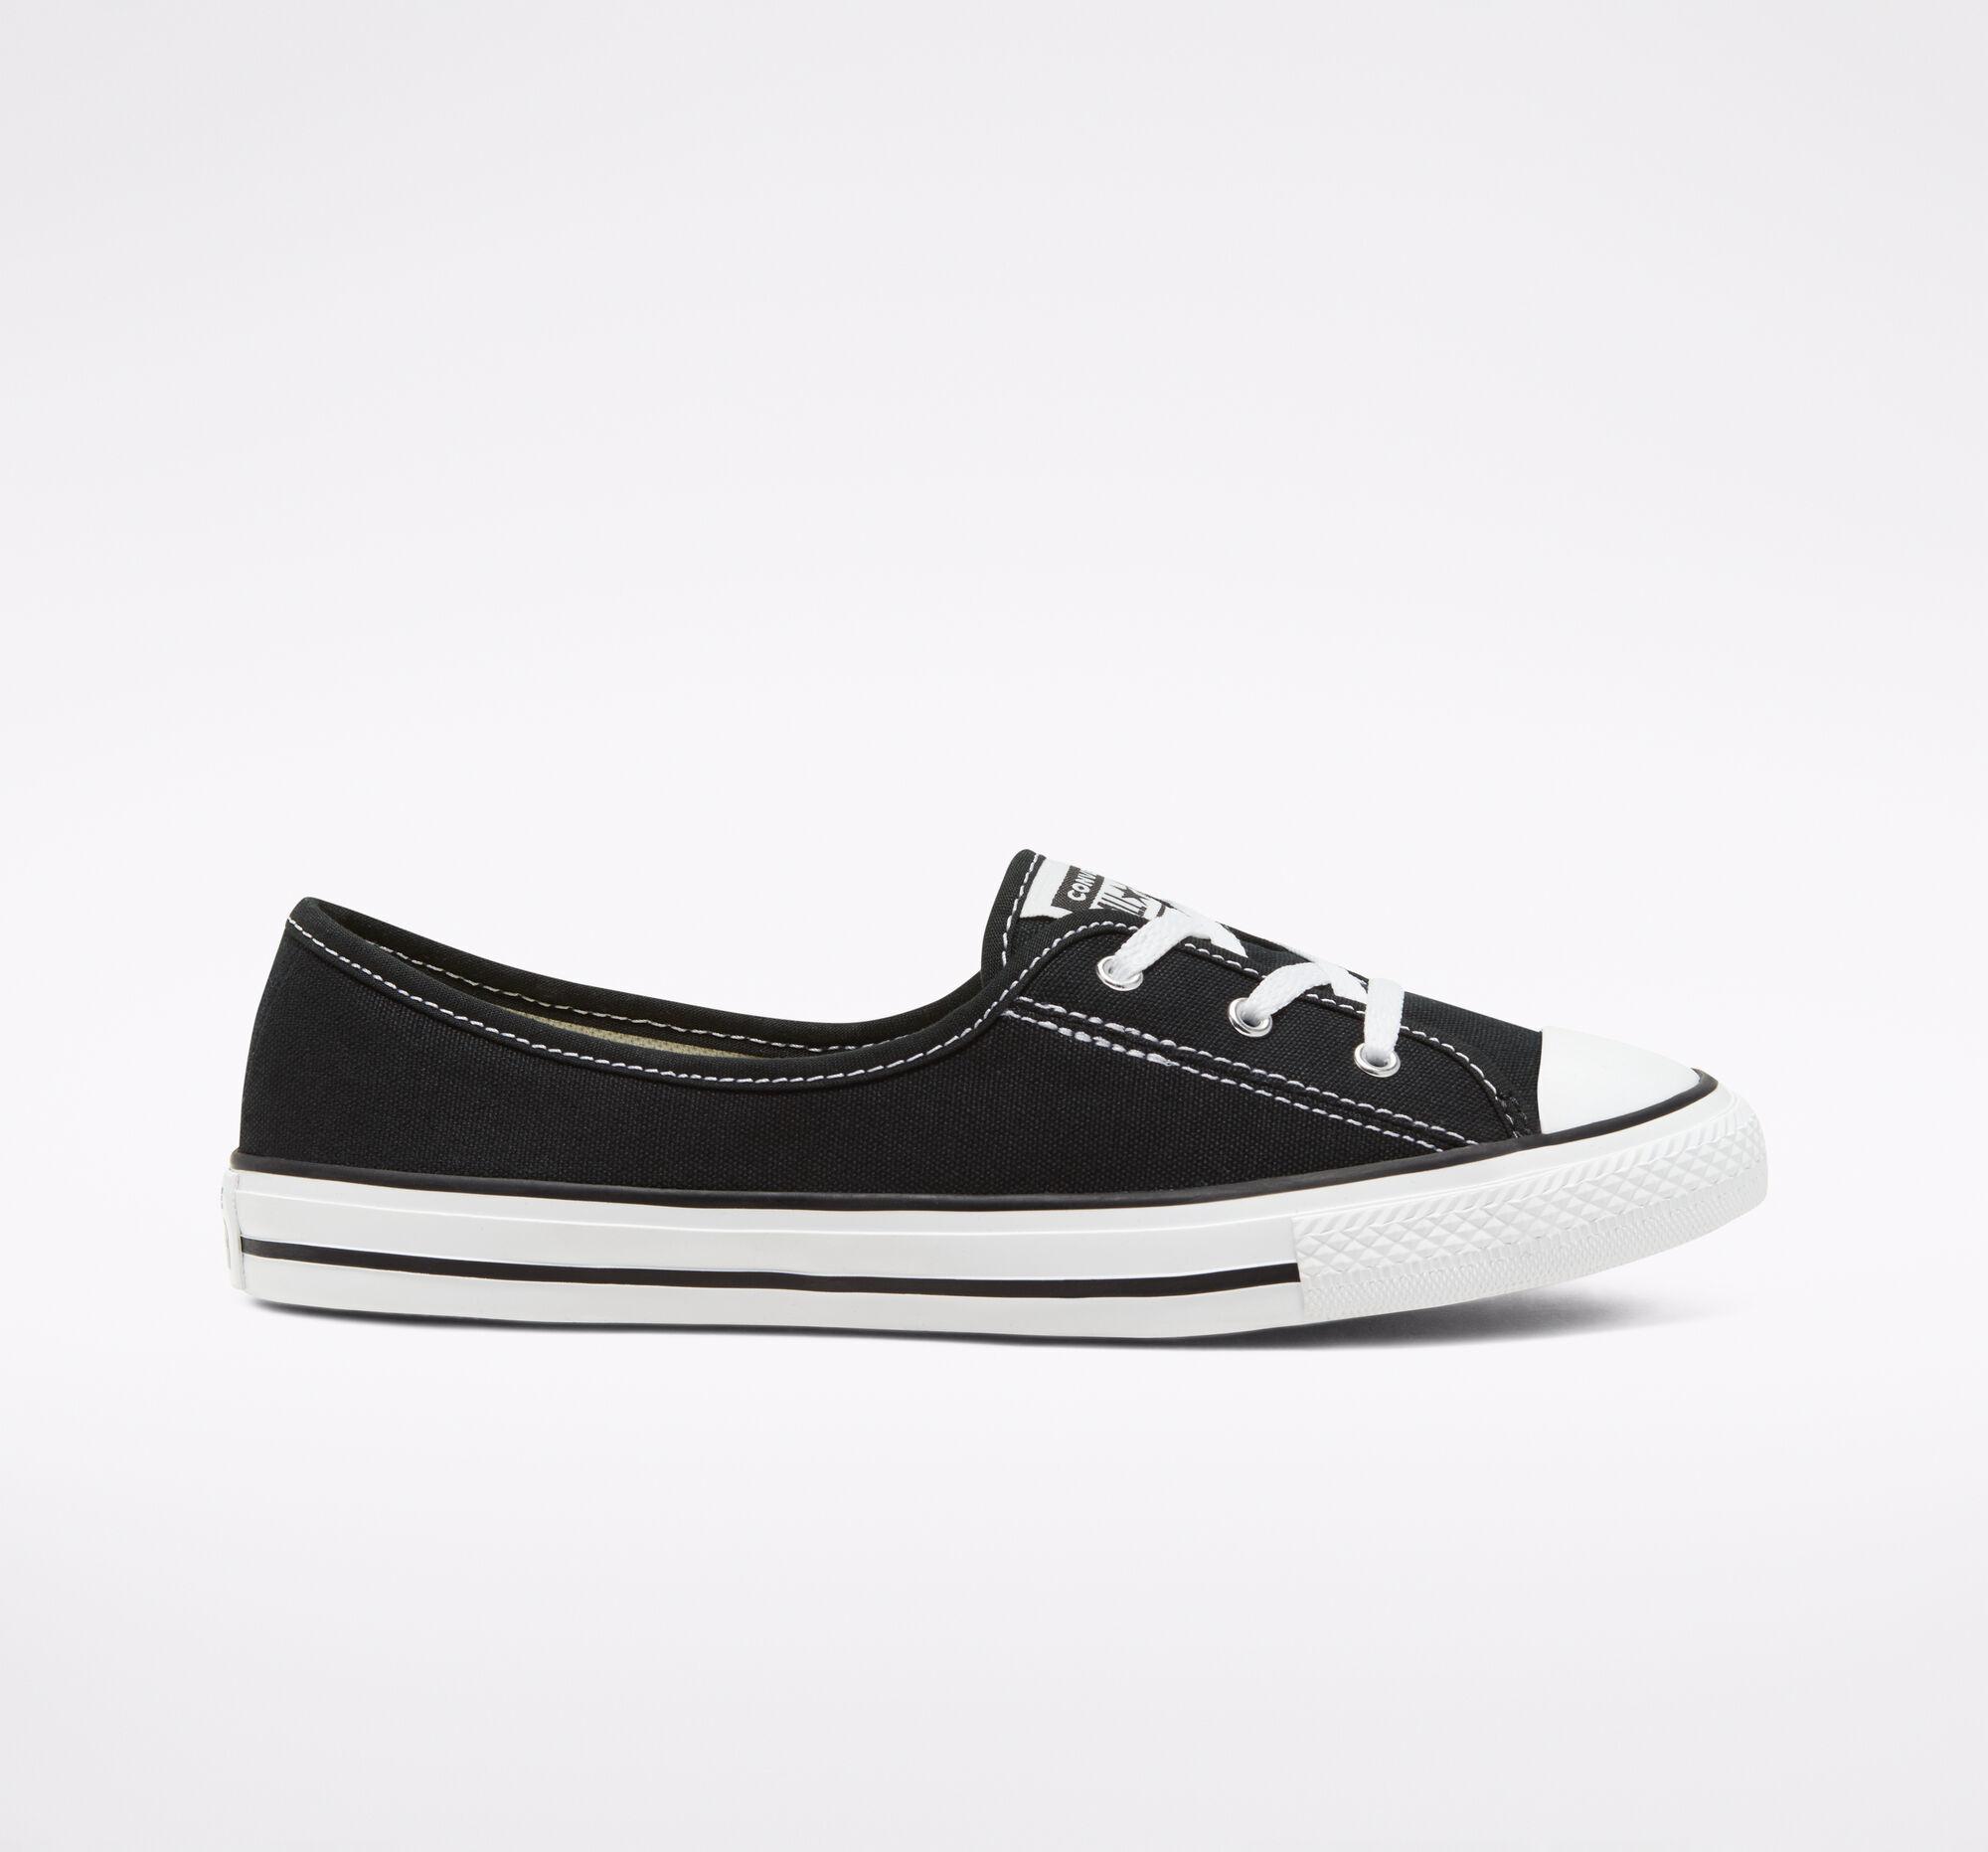 converse all star sans lacet, big selling off 69% - statehouse.gov.sl